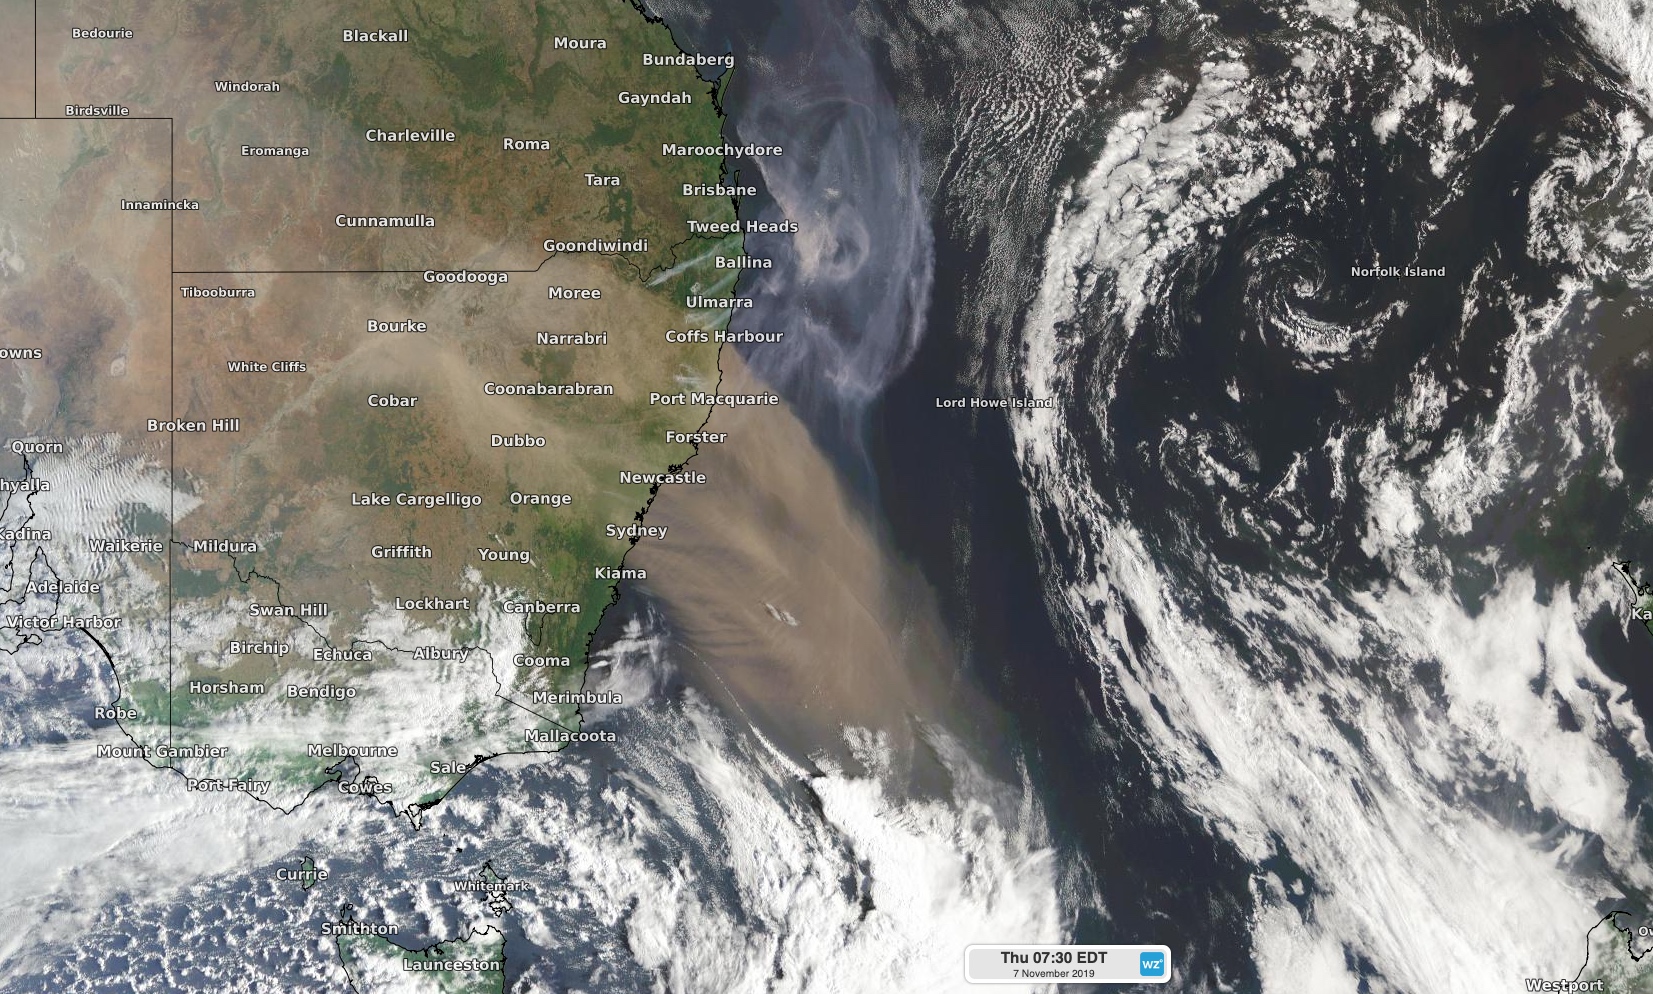 Satellite images show dust and smoke across NSW